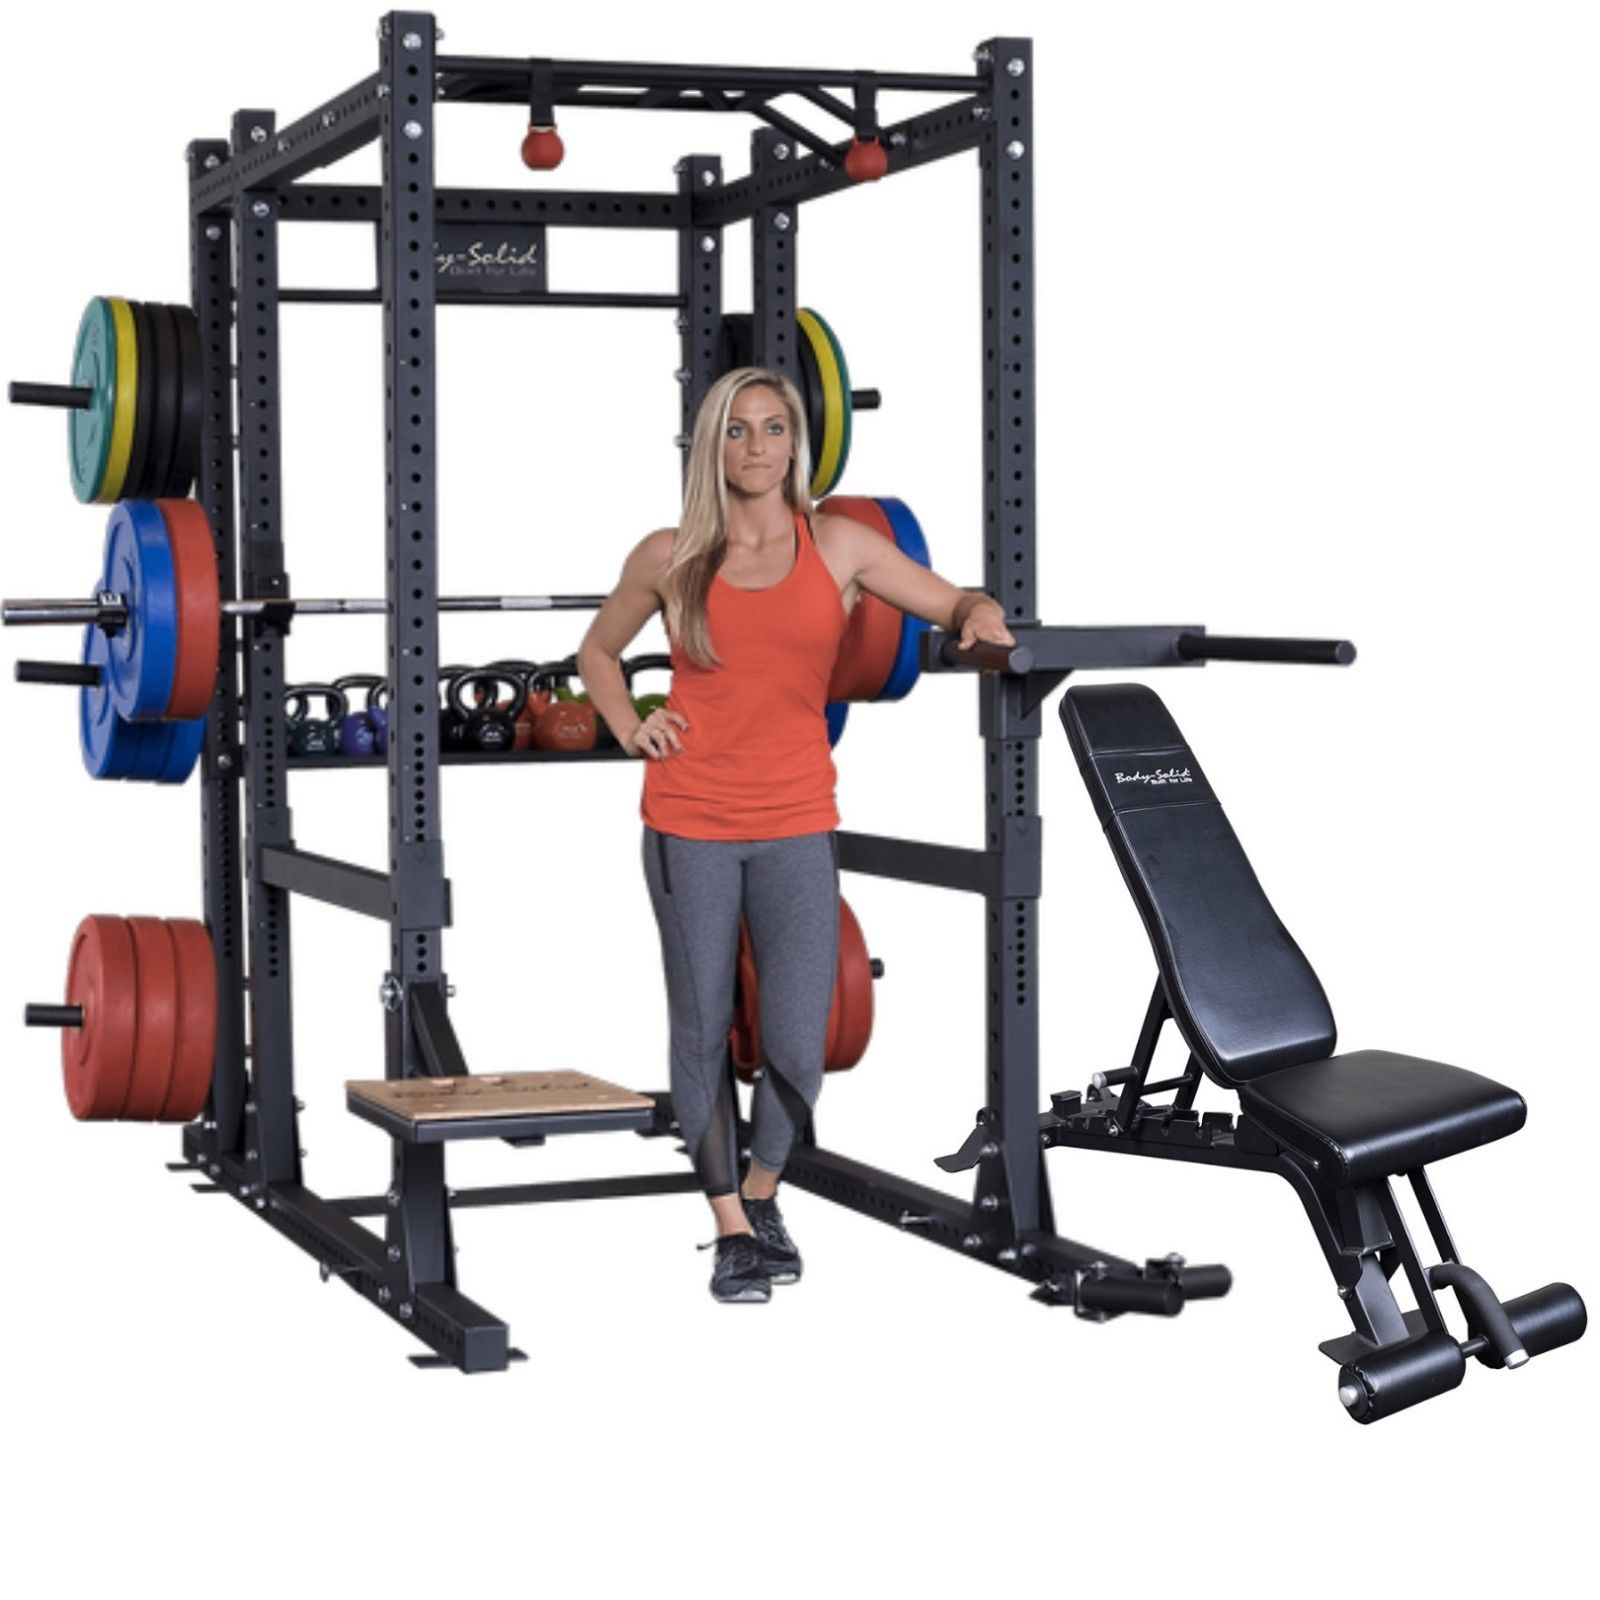 Body-Solid Extended Power Cage Squat Rack Gym Package w/ Bench